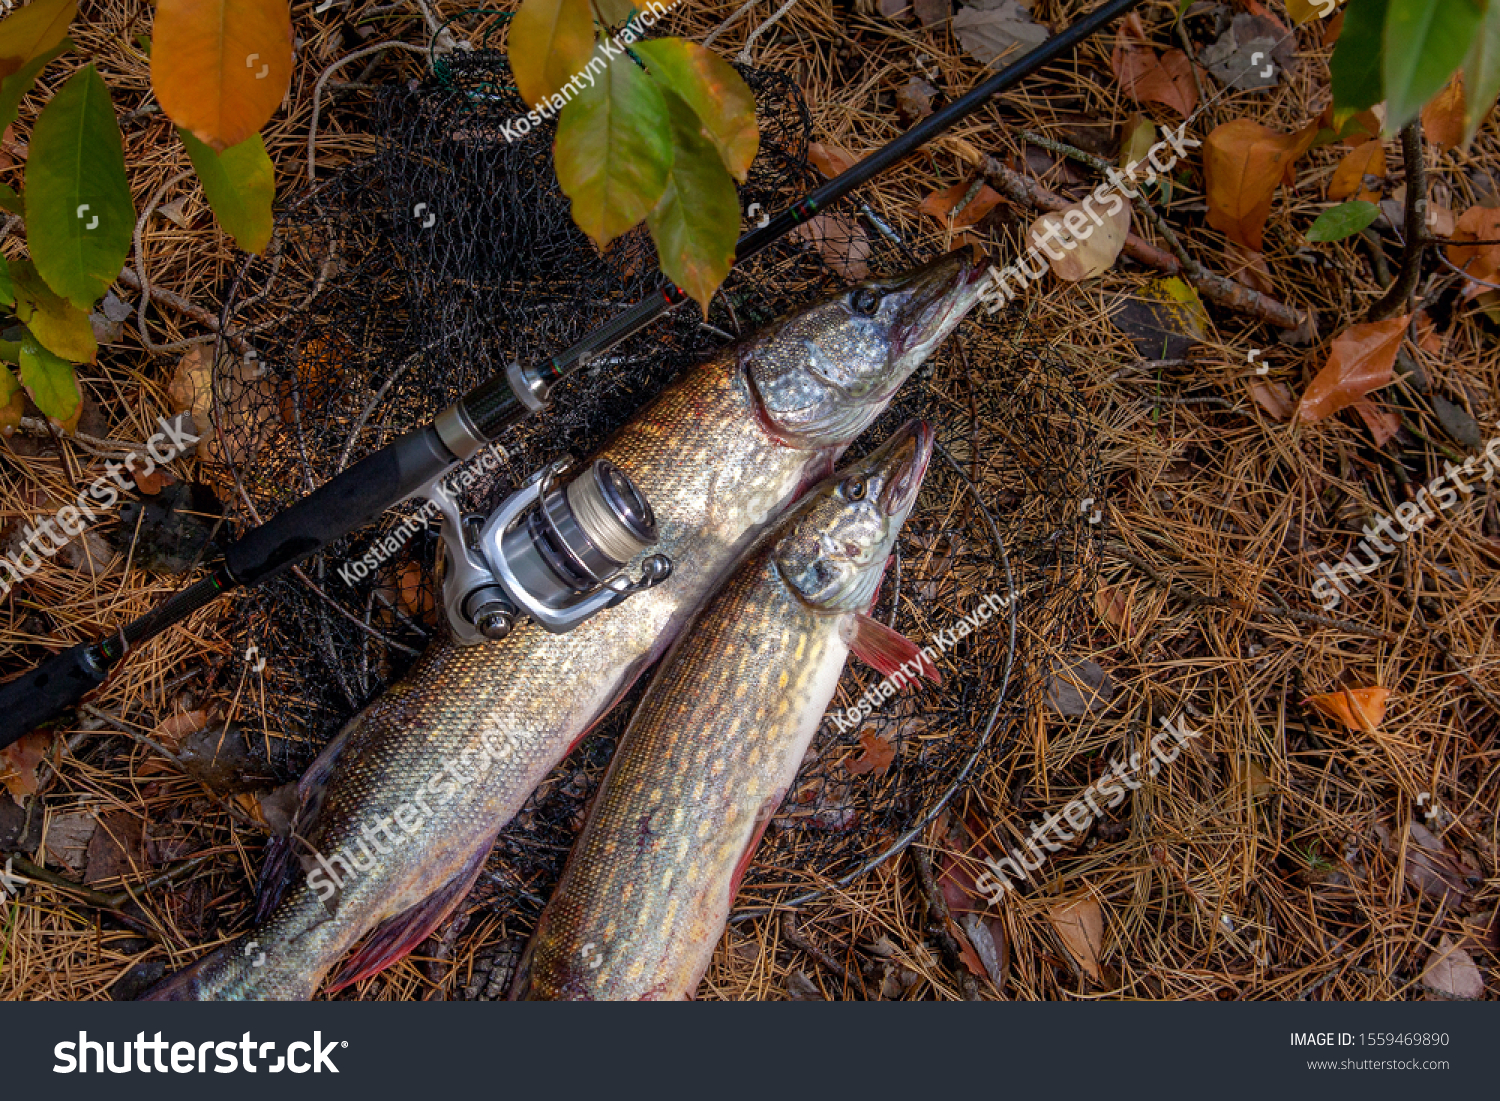 Fishing concept, trophy catch - two big freshwater pikes fish know as Esox Lucius just taken from the water on keep net. Freshwater Northern pikes fish know as Esox Lucius and fishing equipment #1559469890